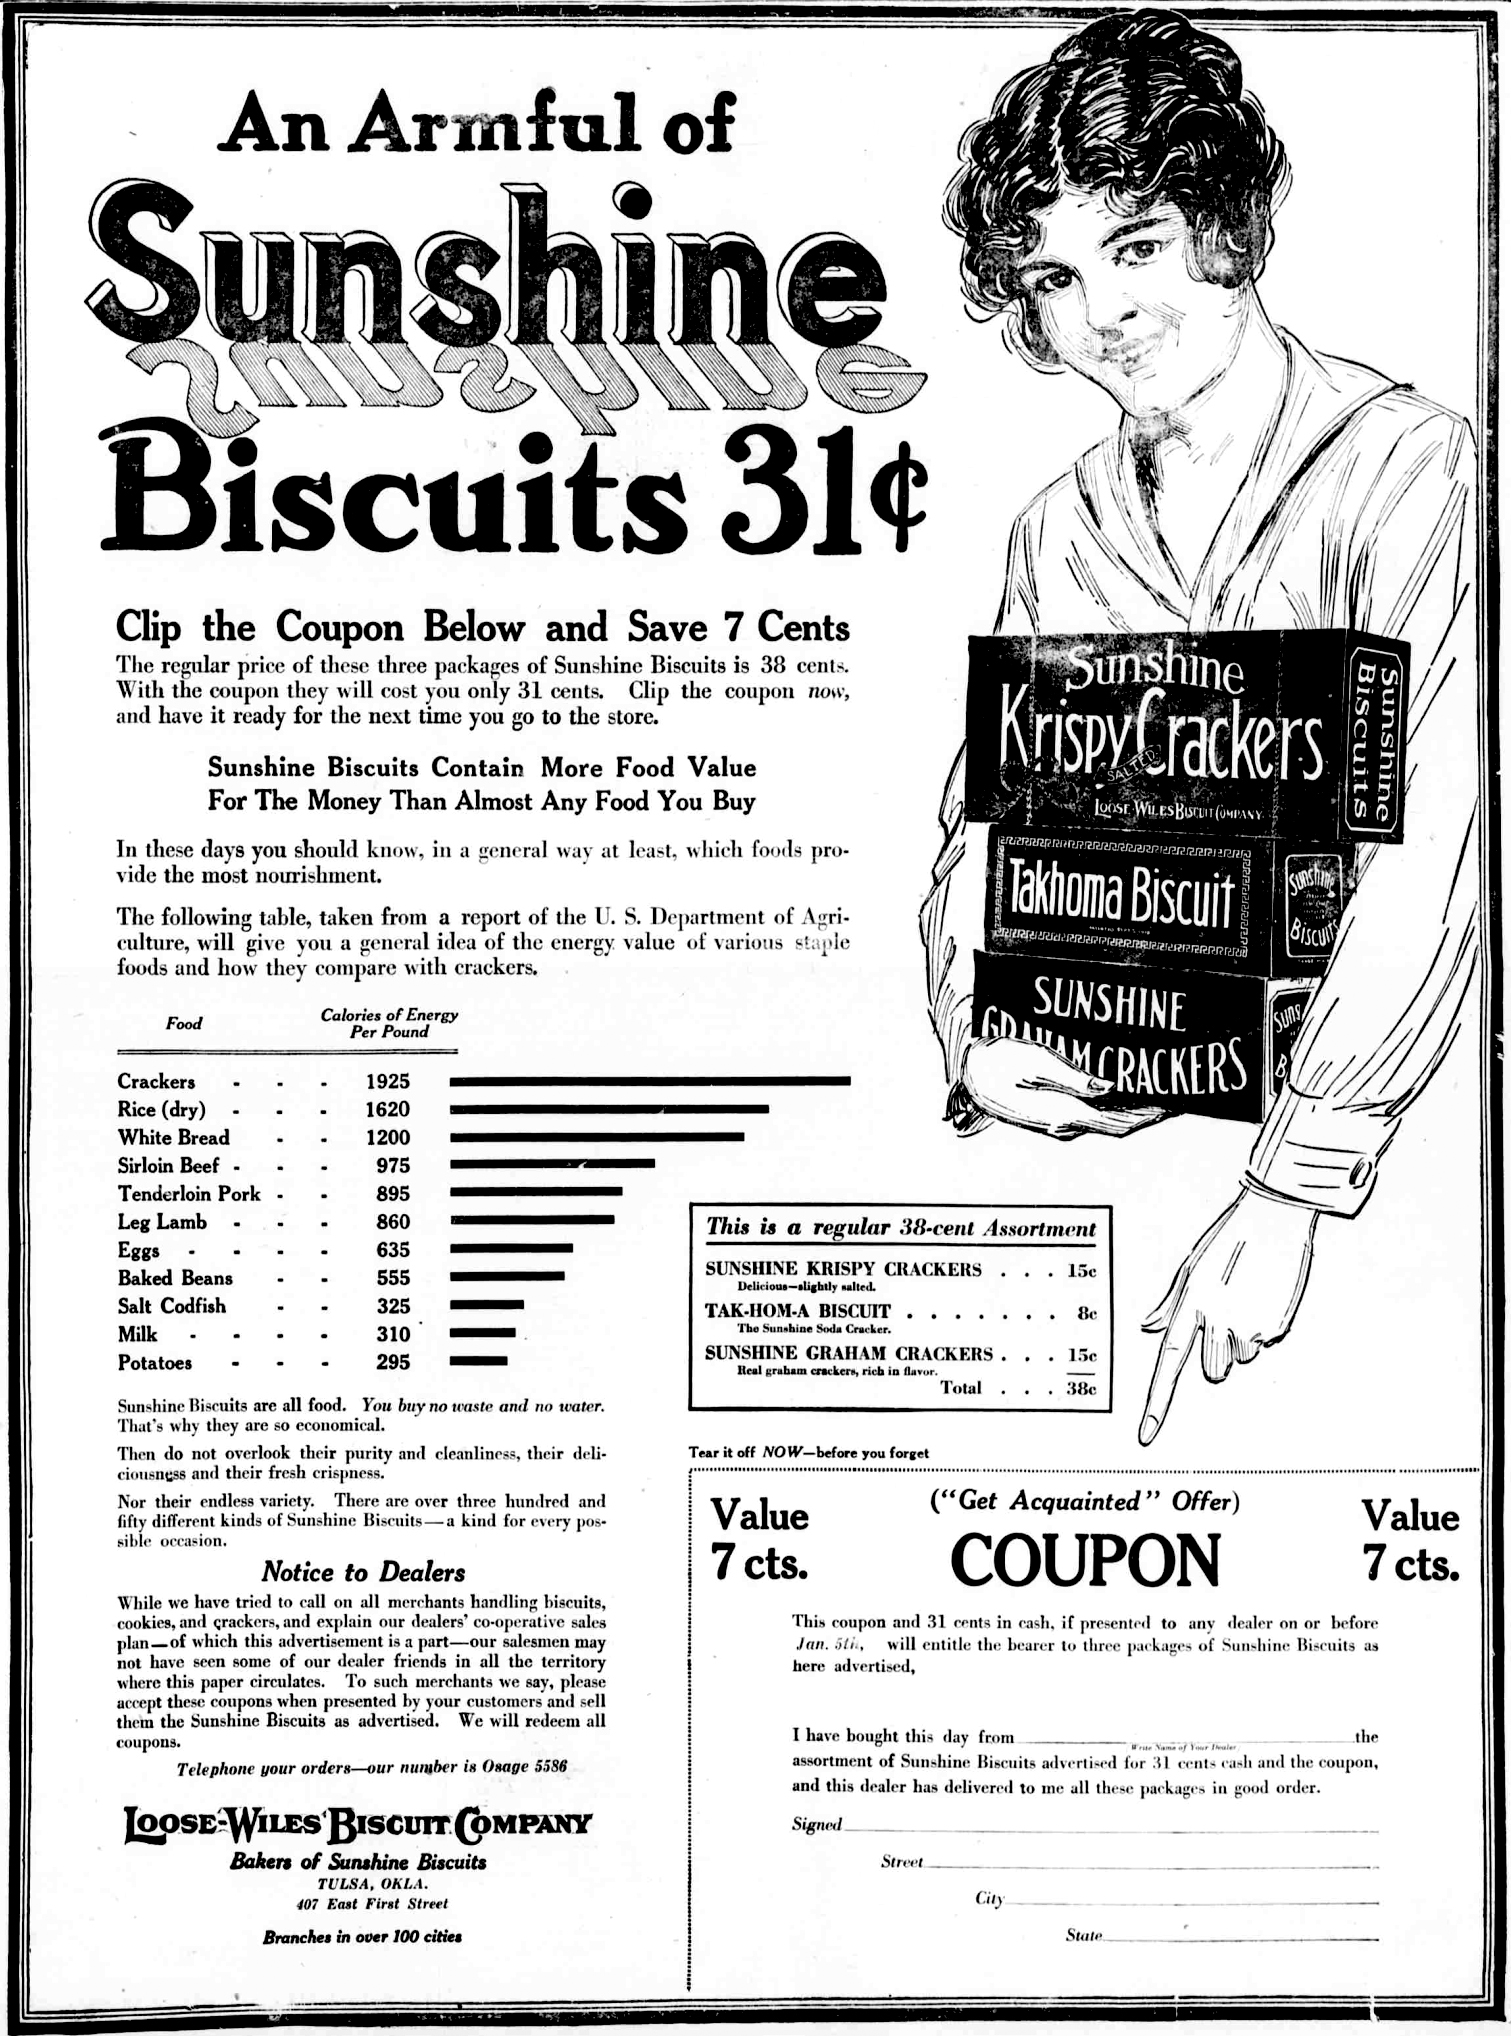 1917 Sunshine Biscuits advertisement from The Tulsa Daily World